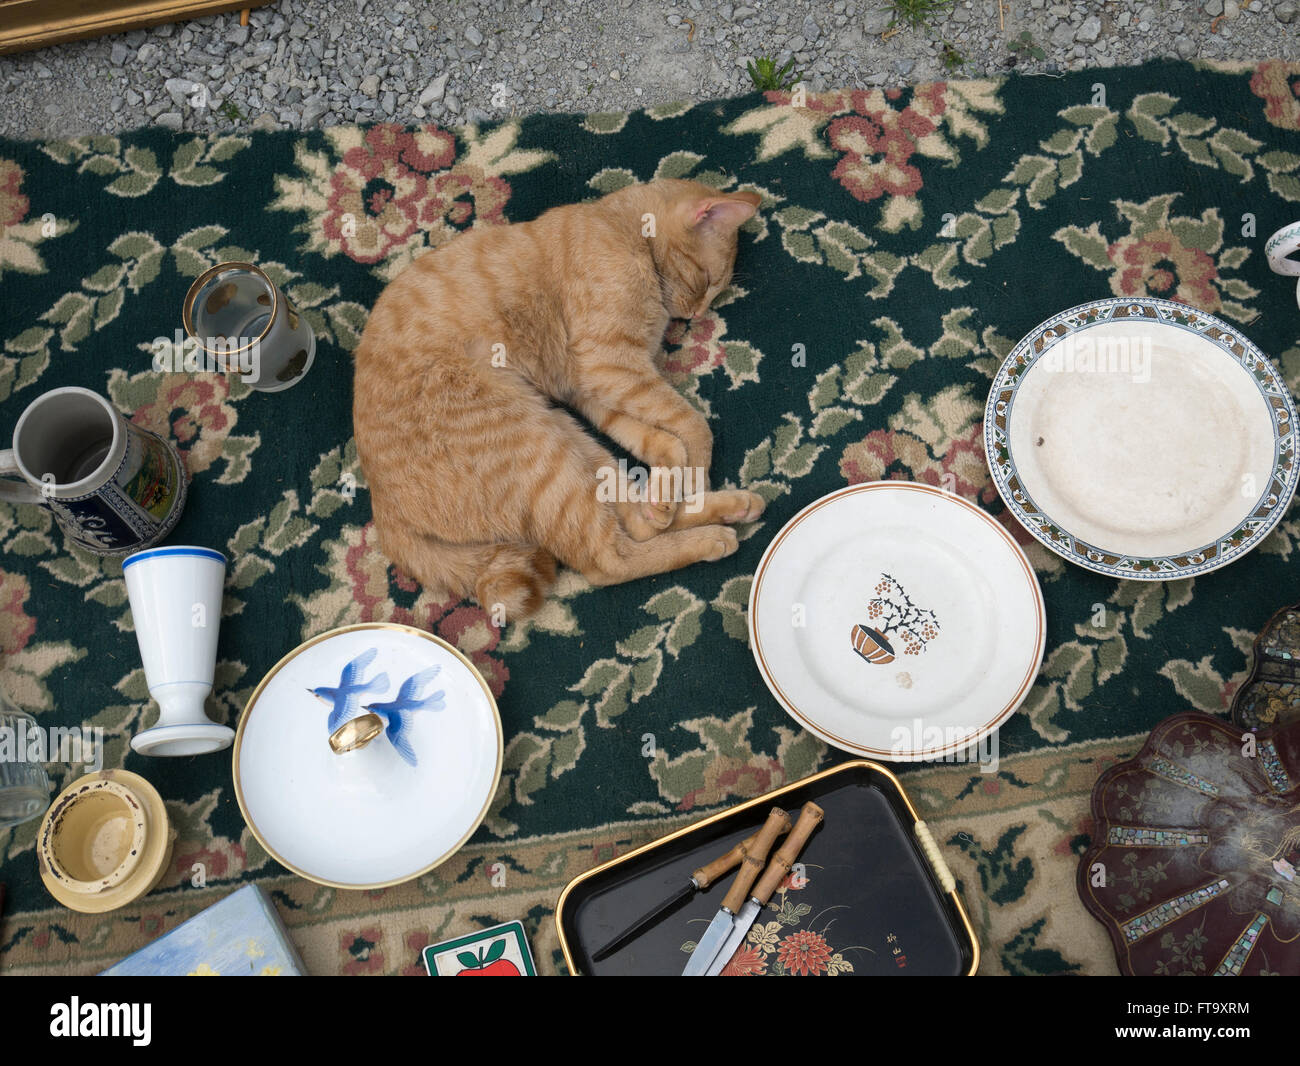 A ginger cat takes a nap among items laid out at a car boot sale in  Languedoc, France Stock Photo - Alamy